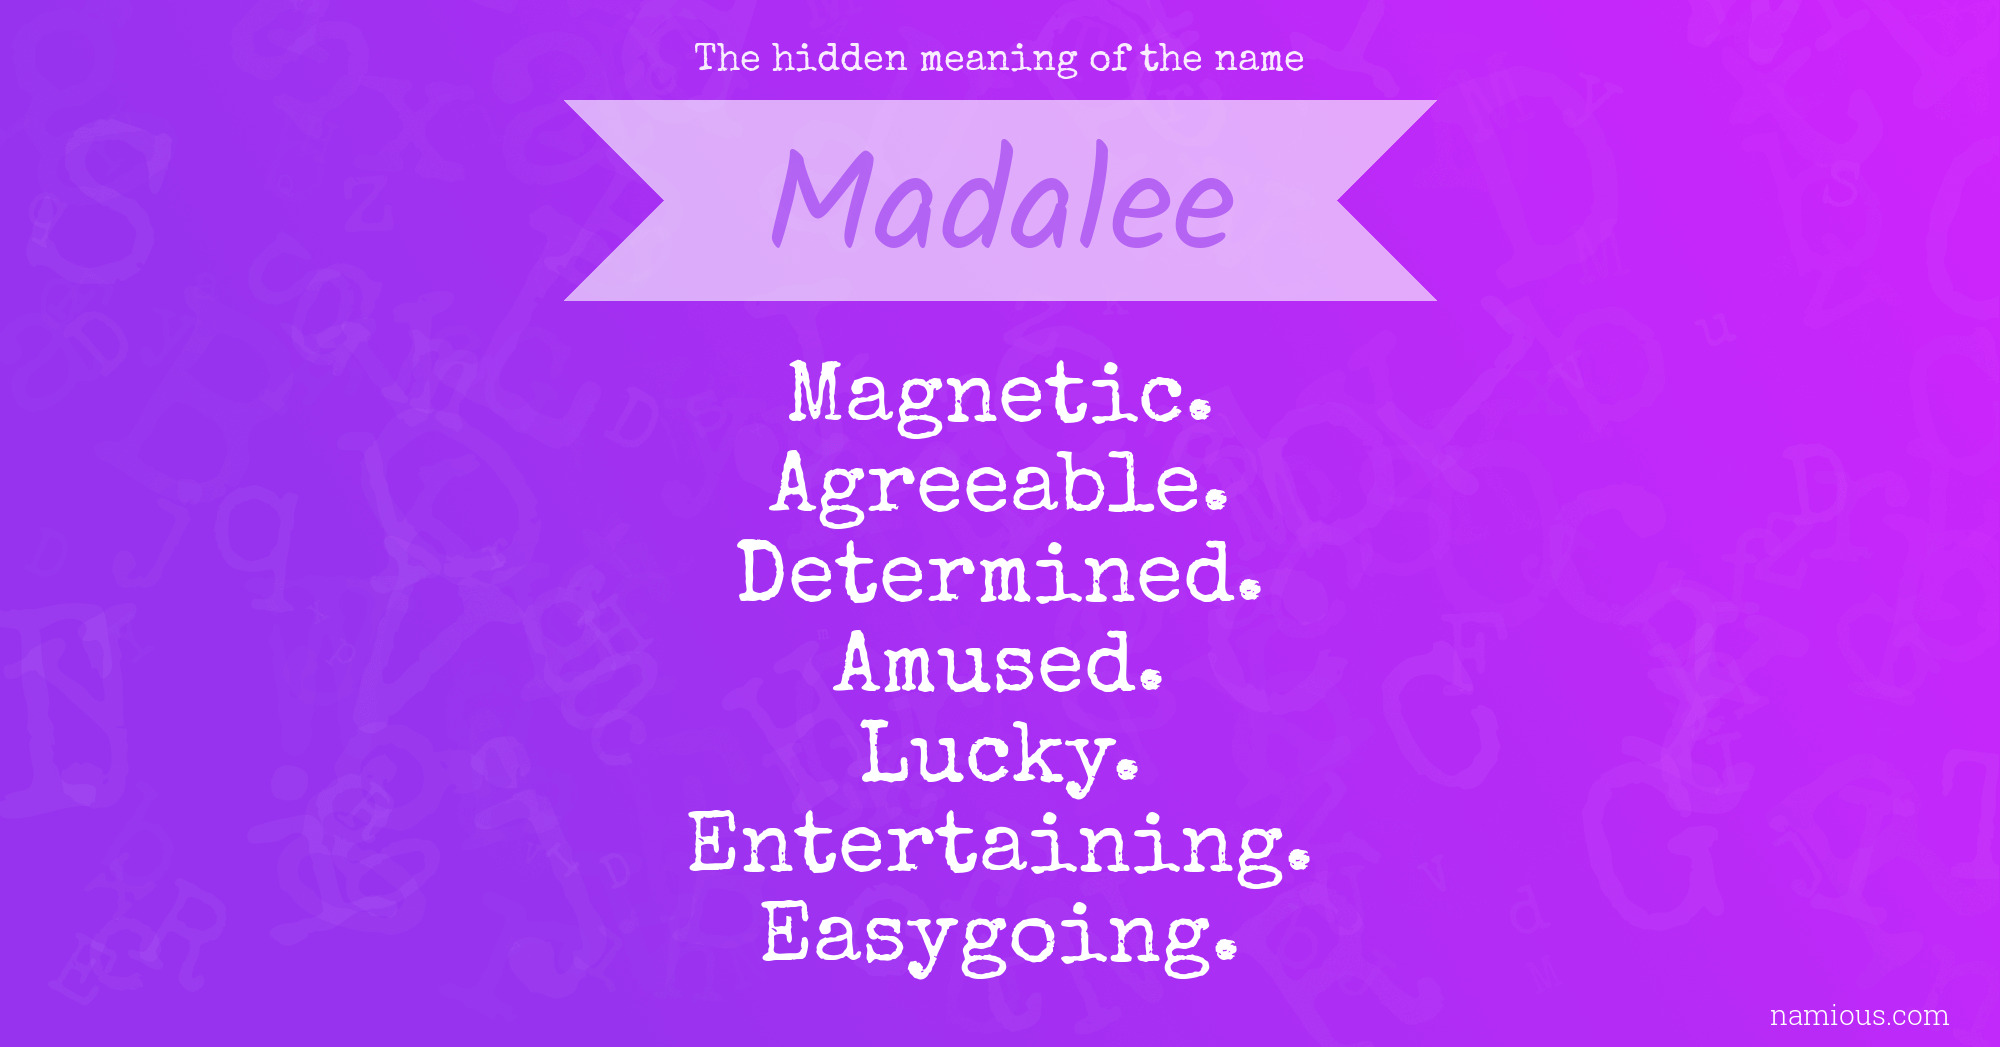 The hidden meaning of the name Madalee